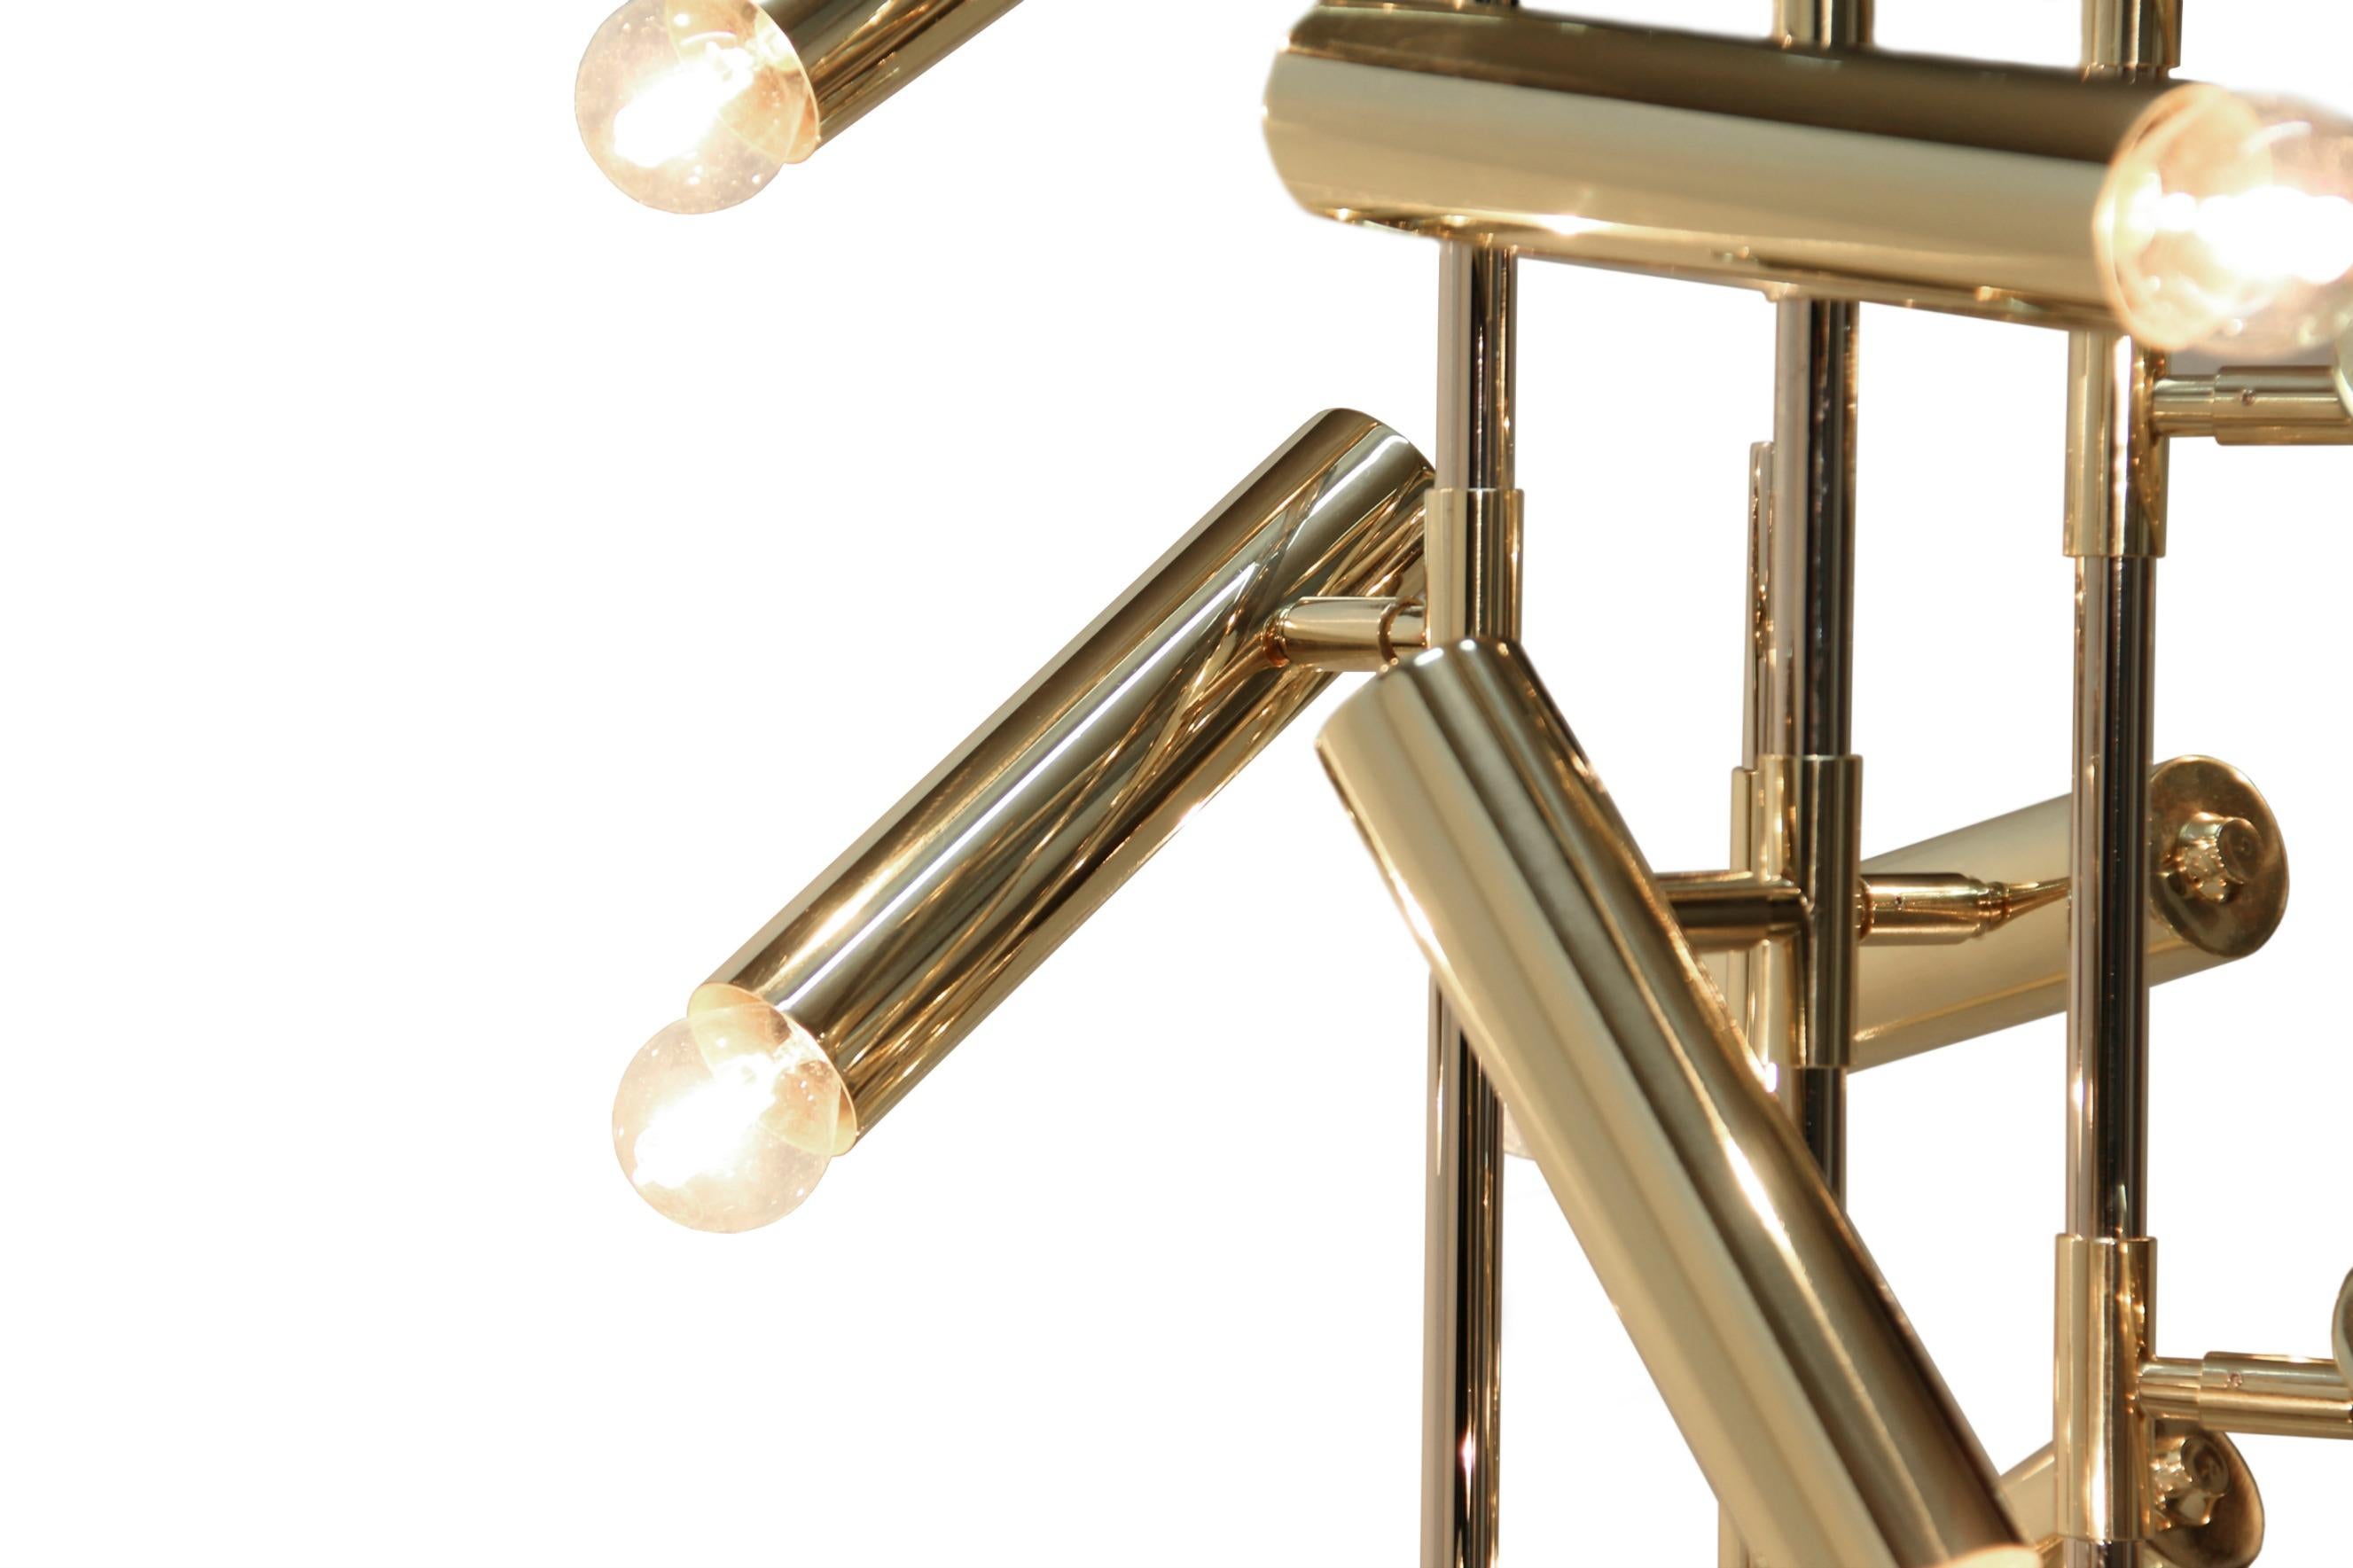 Portuguese Cypres Floor Lamp in Glossy Gold-Plated Brass with Marble Base by Brabbu For Sale